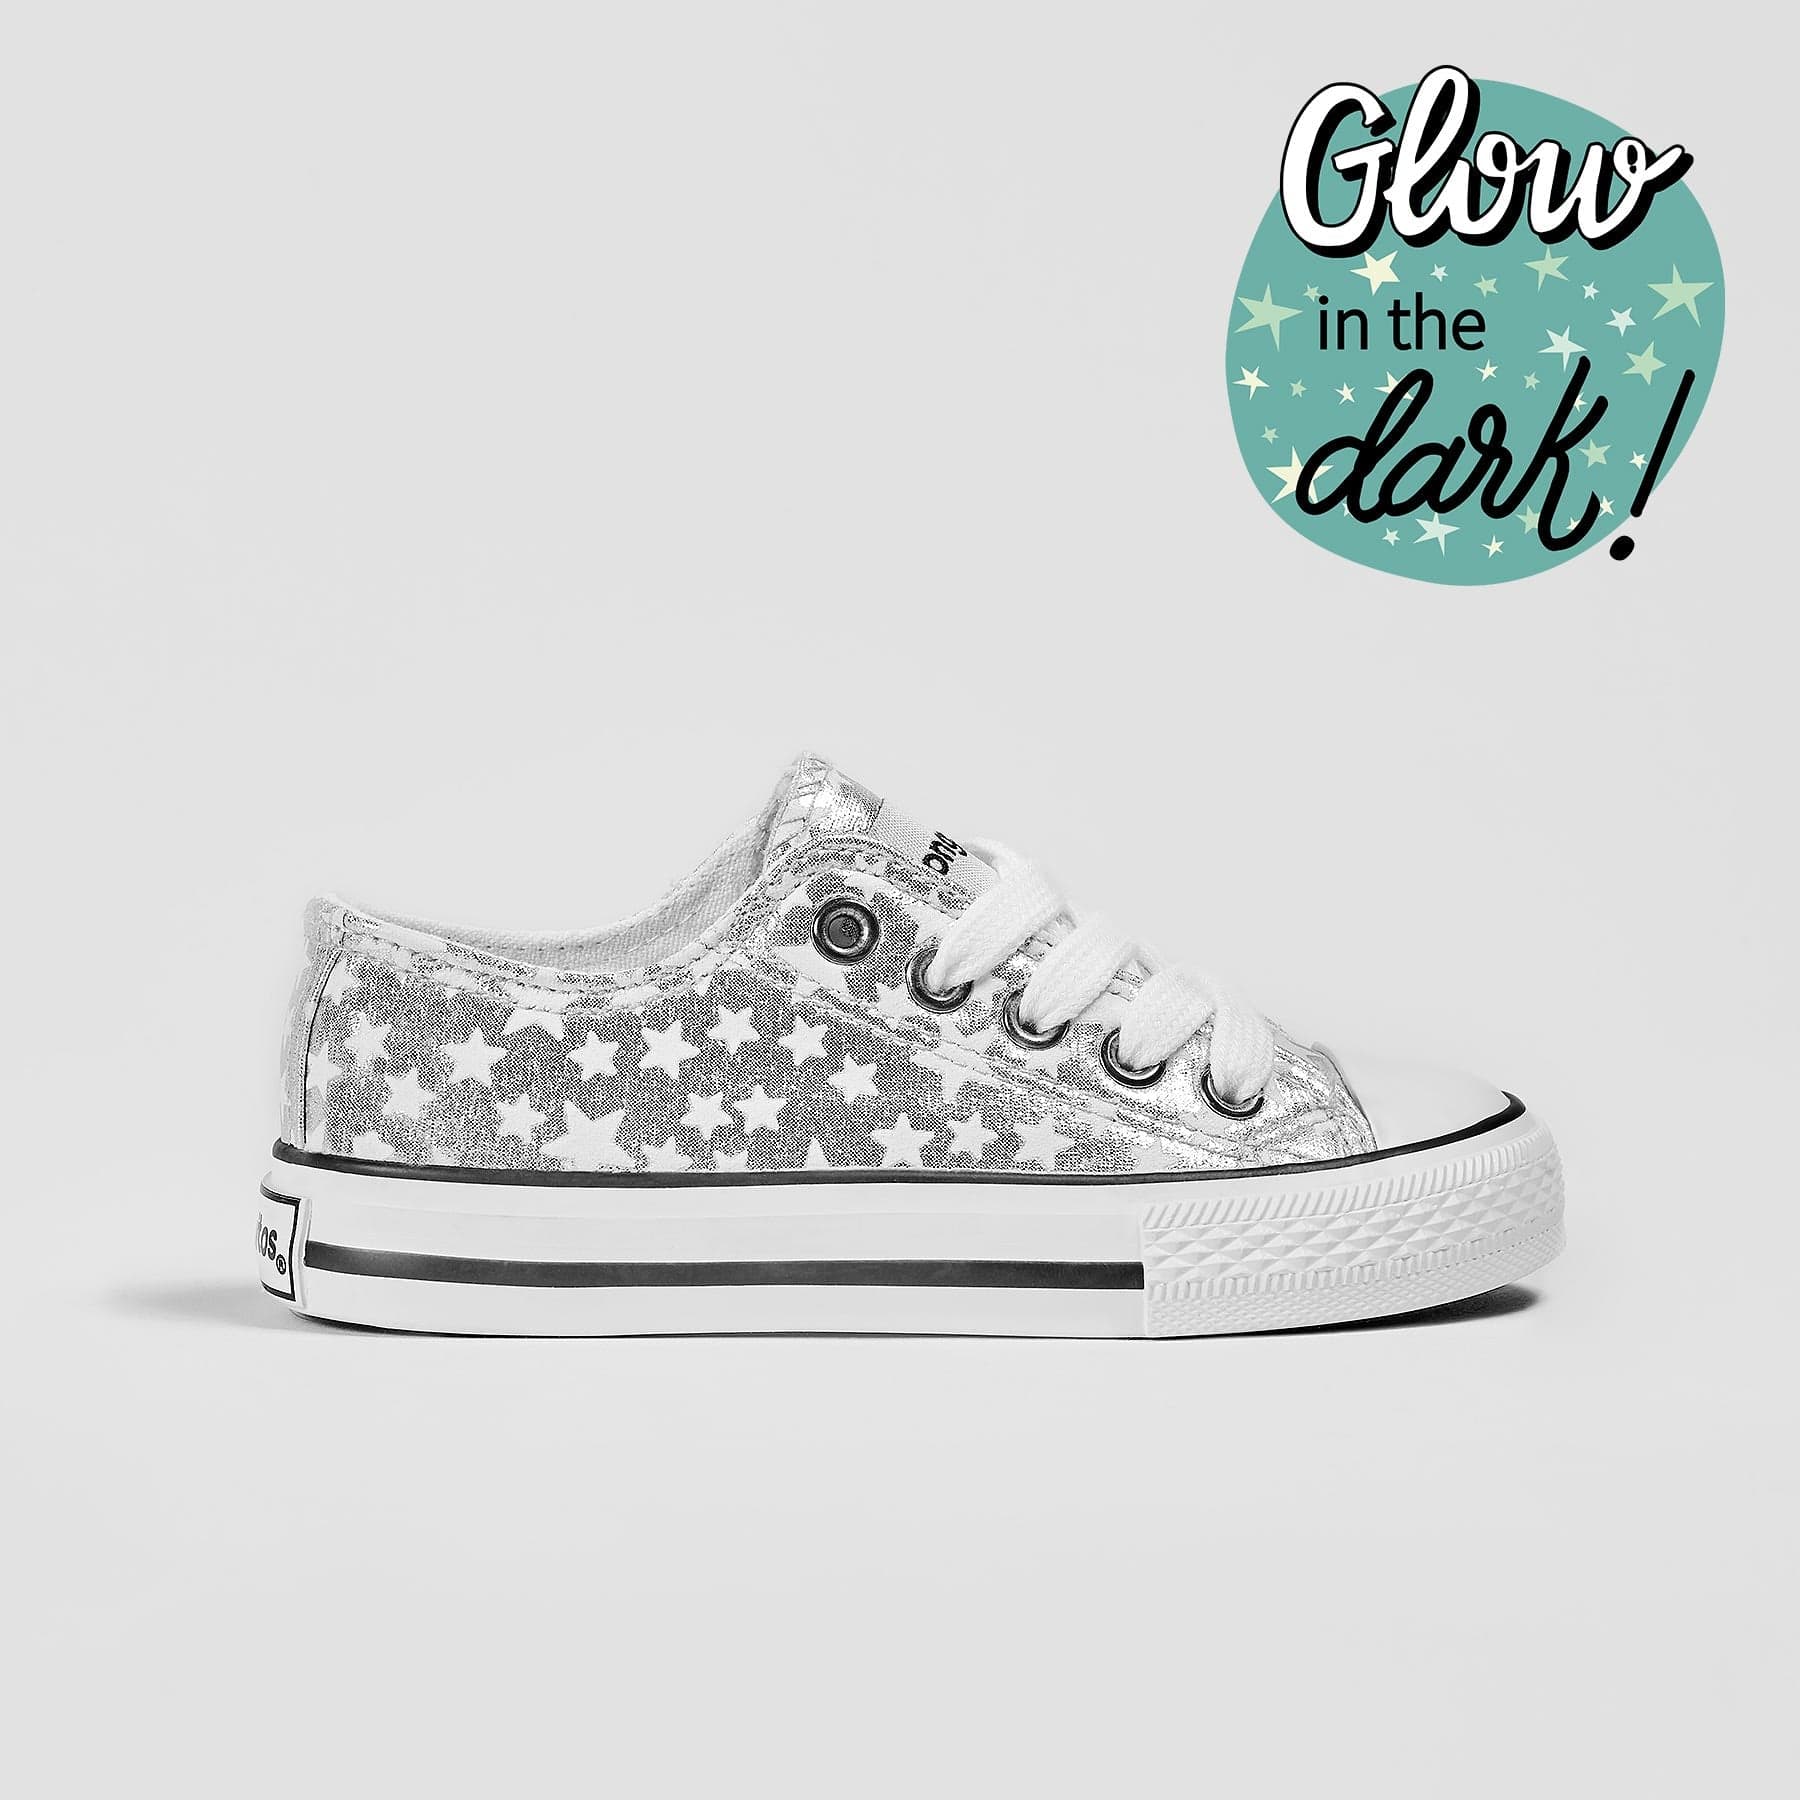 CONGUITOS Shoes Unisex Silver Stars Sneakers